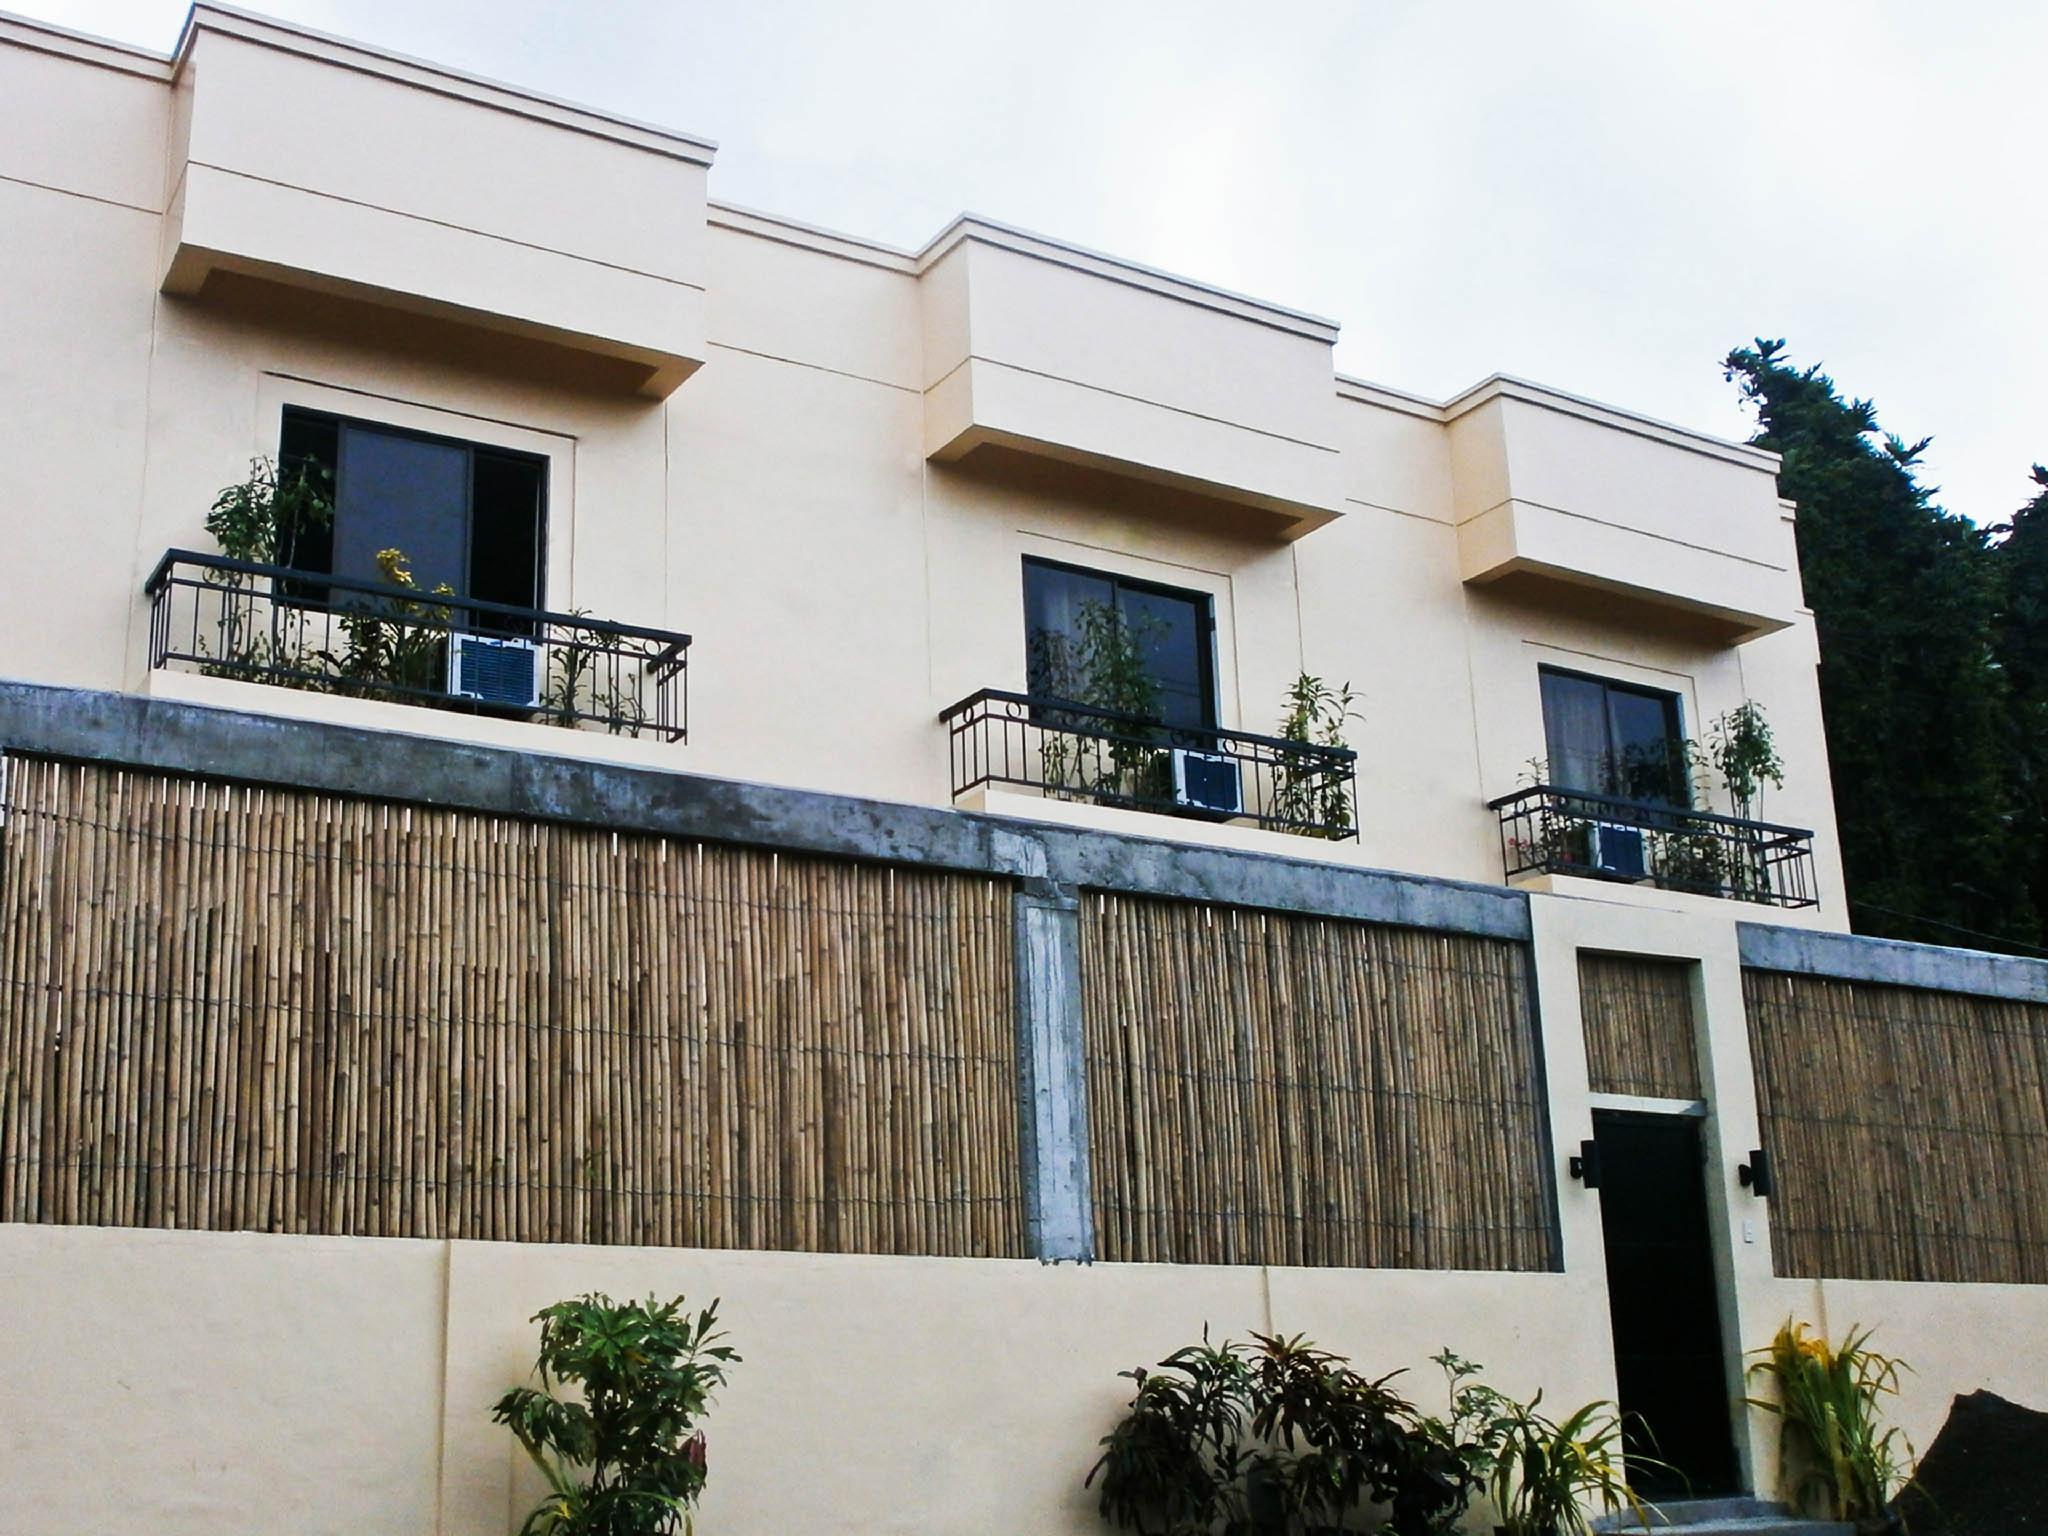 Bease's Bed And Breakfast - Kalibo